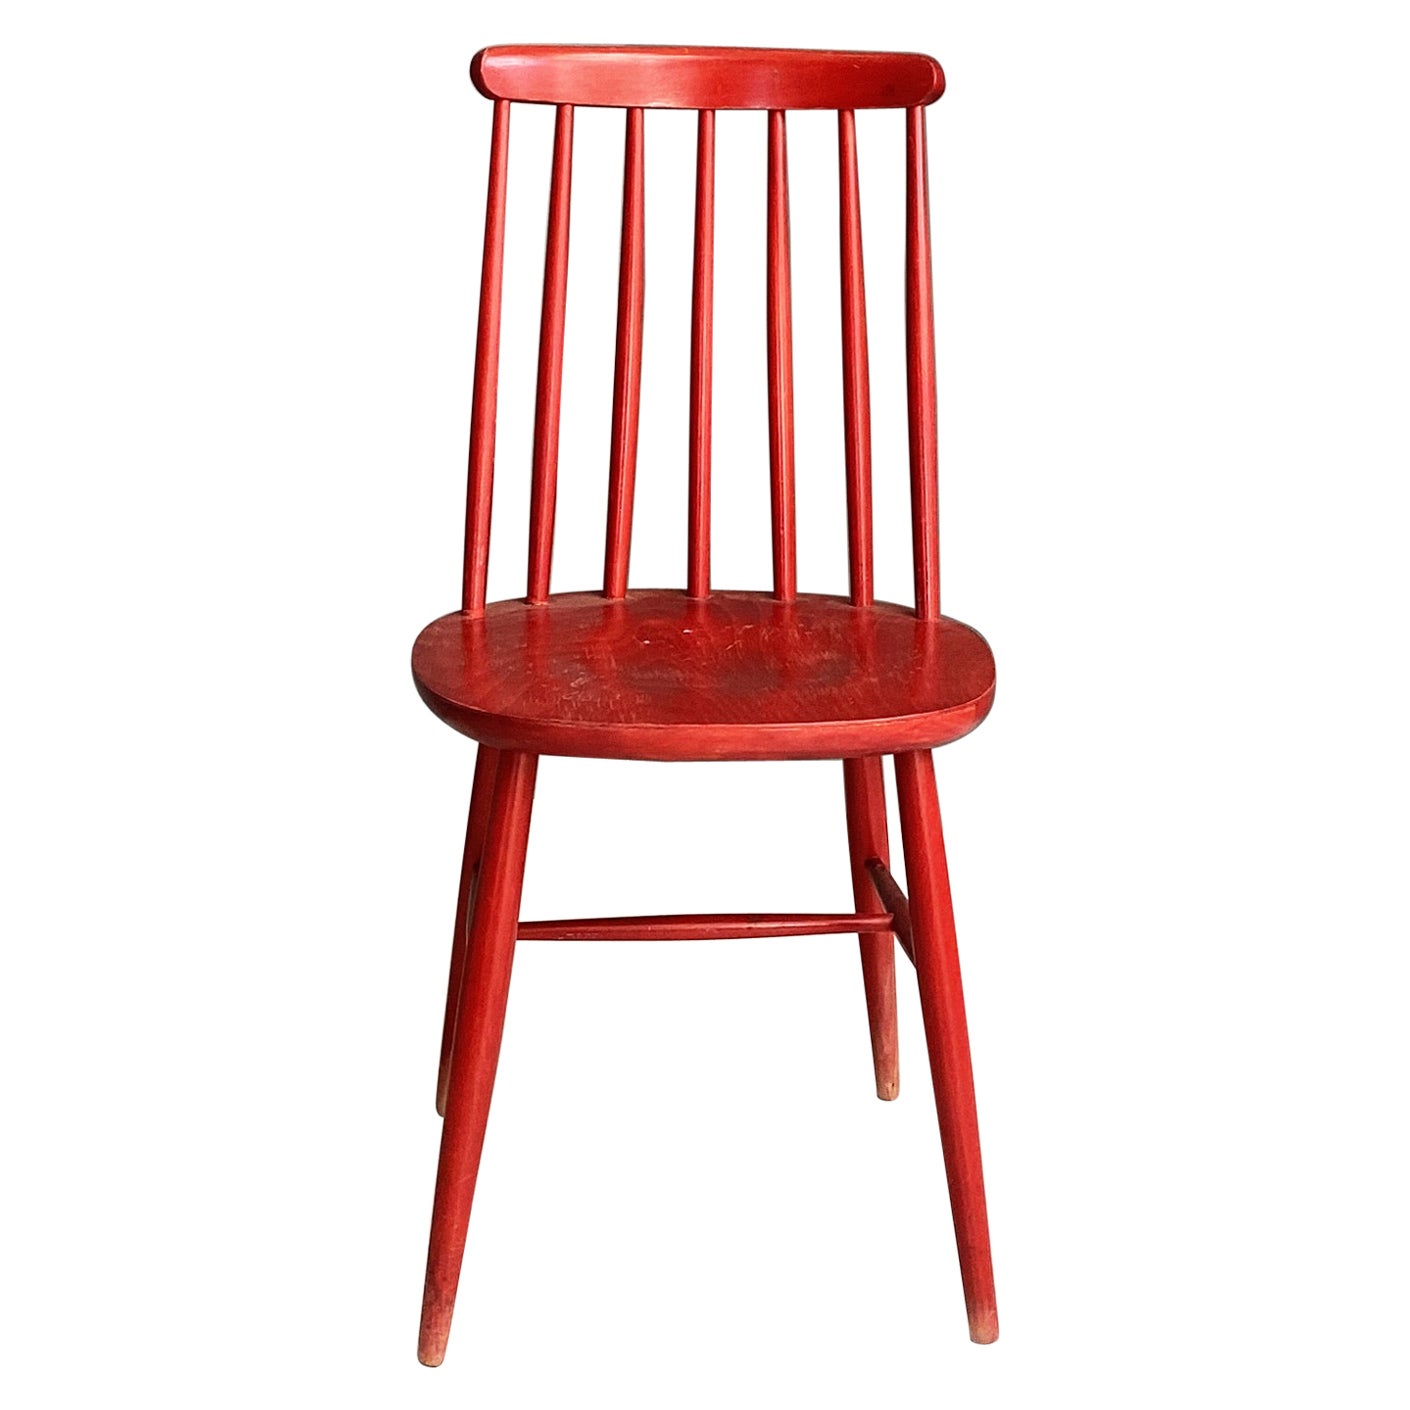 Mid-Century Modern Northern Europe Red Wooden Chair, 1960s